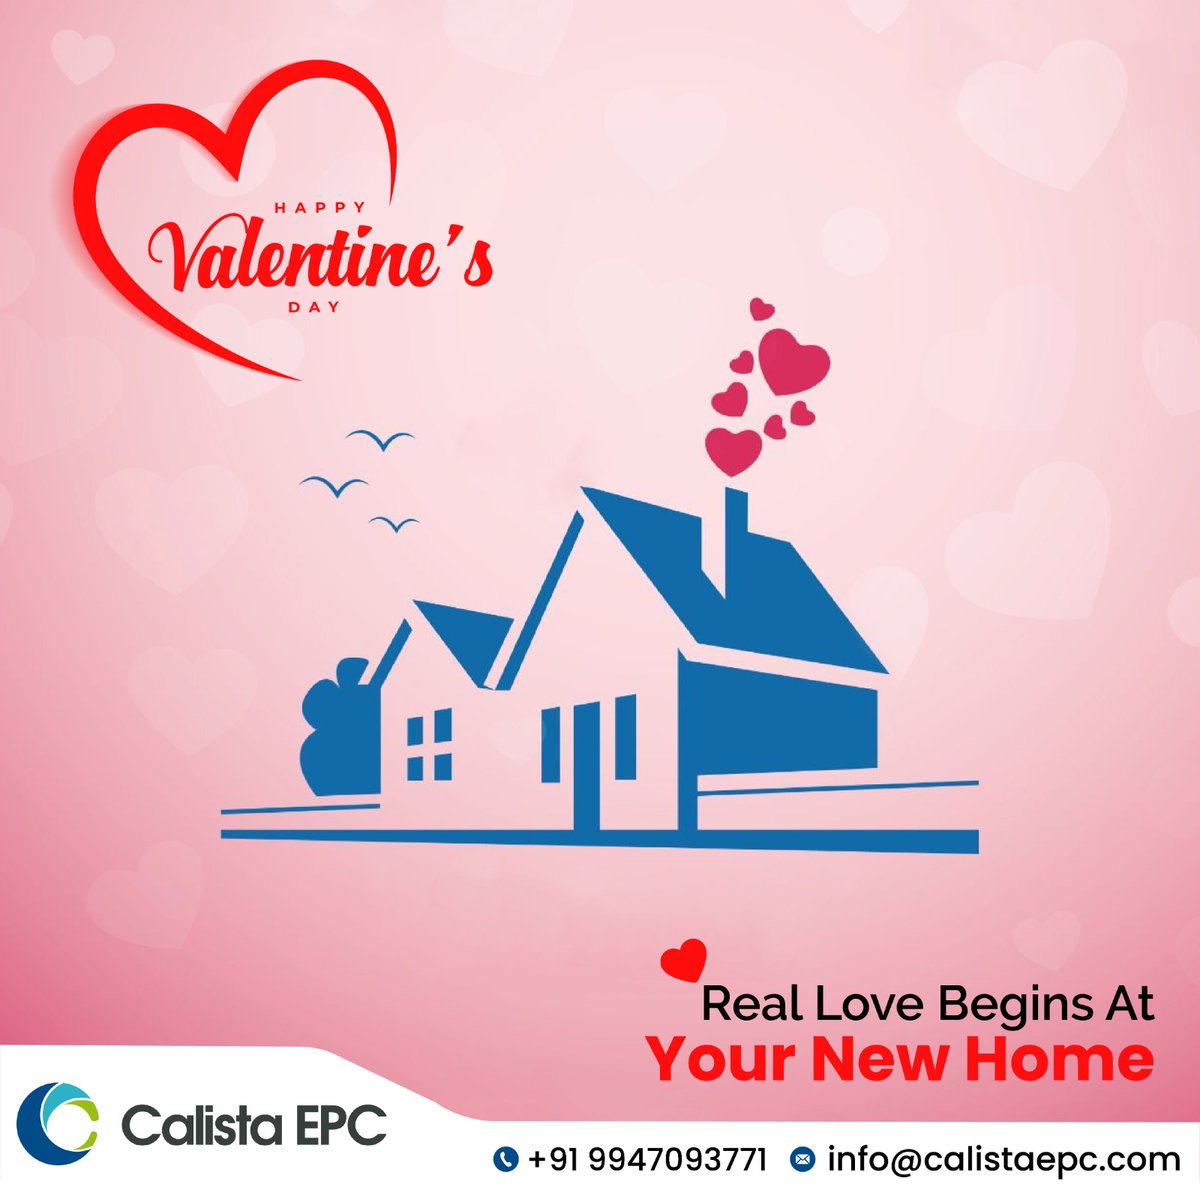 A new home is a perfect place to grow and strengthen your love bonds. Calista EPC wishes all loving couples a Happy Valentine's Day.

#happyvalentinesday #love #valentinesdayspecial #valentinesdaycards #valentinesdayideas #valentinesdayflowers #valentinesday2023 #girlfriendgift